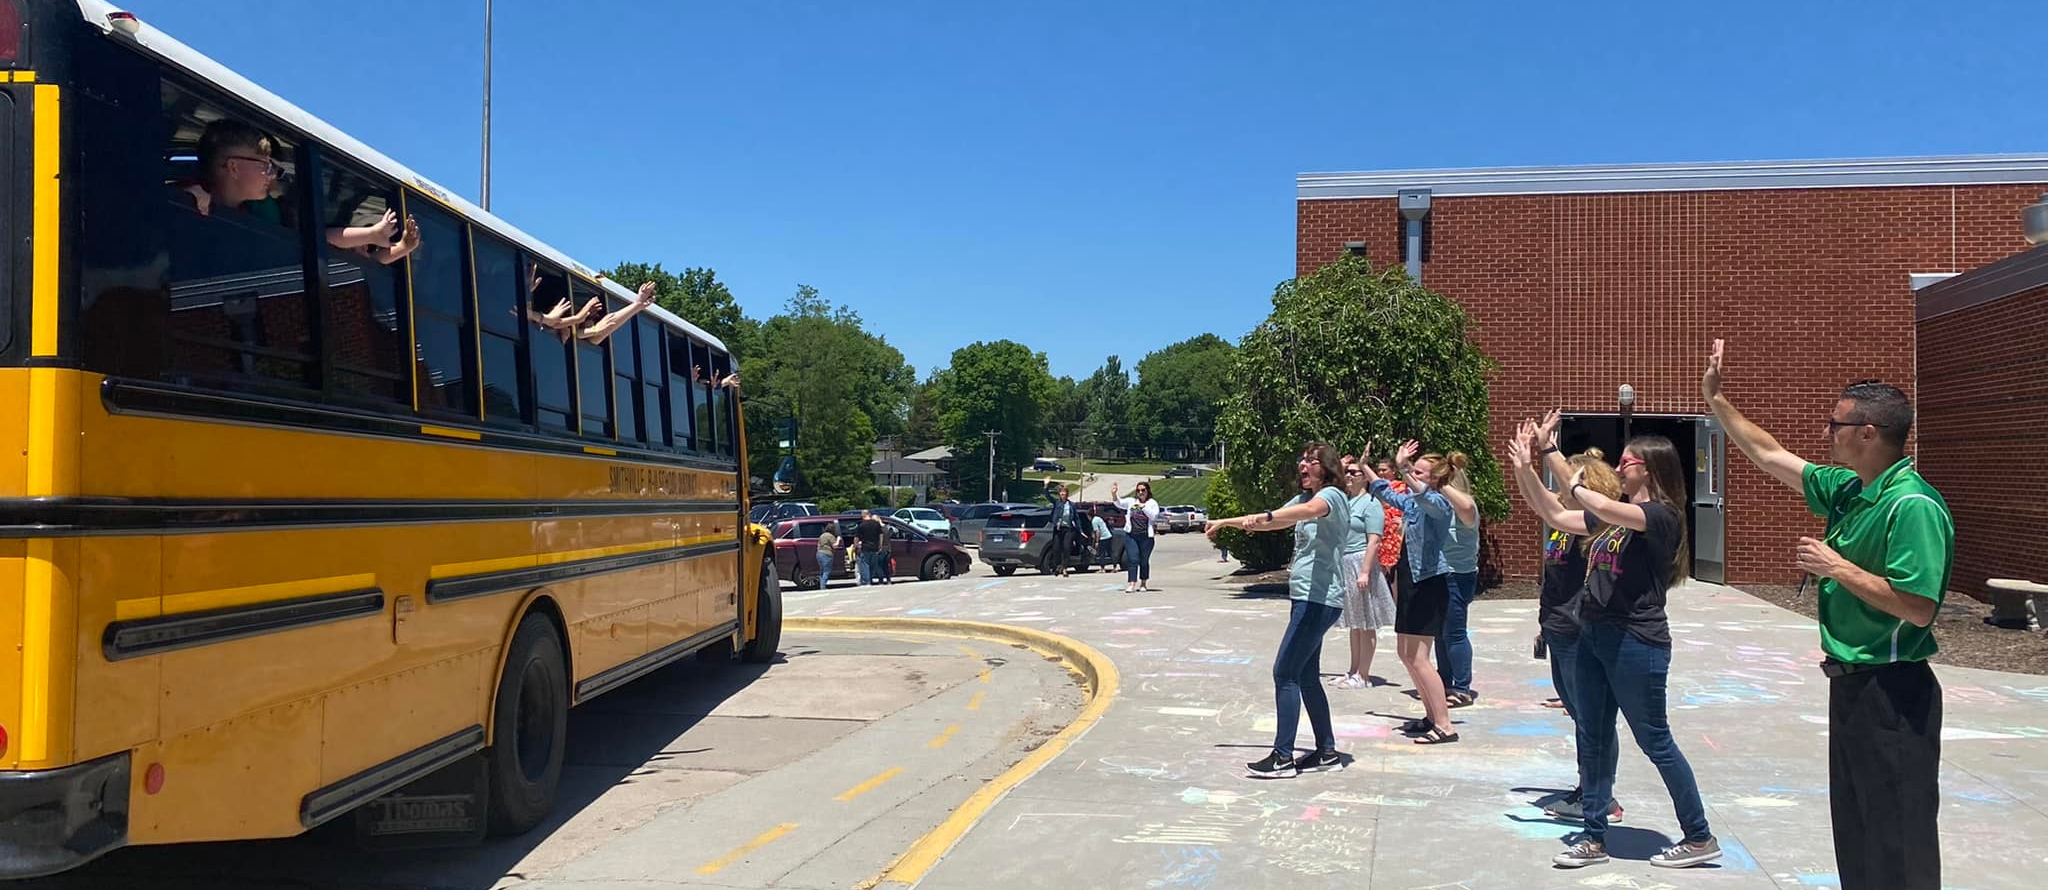 Teachers wave to students on bus on the last day of school